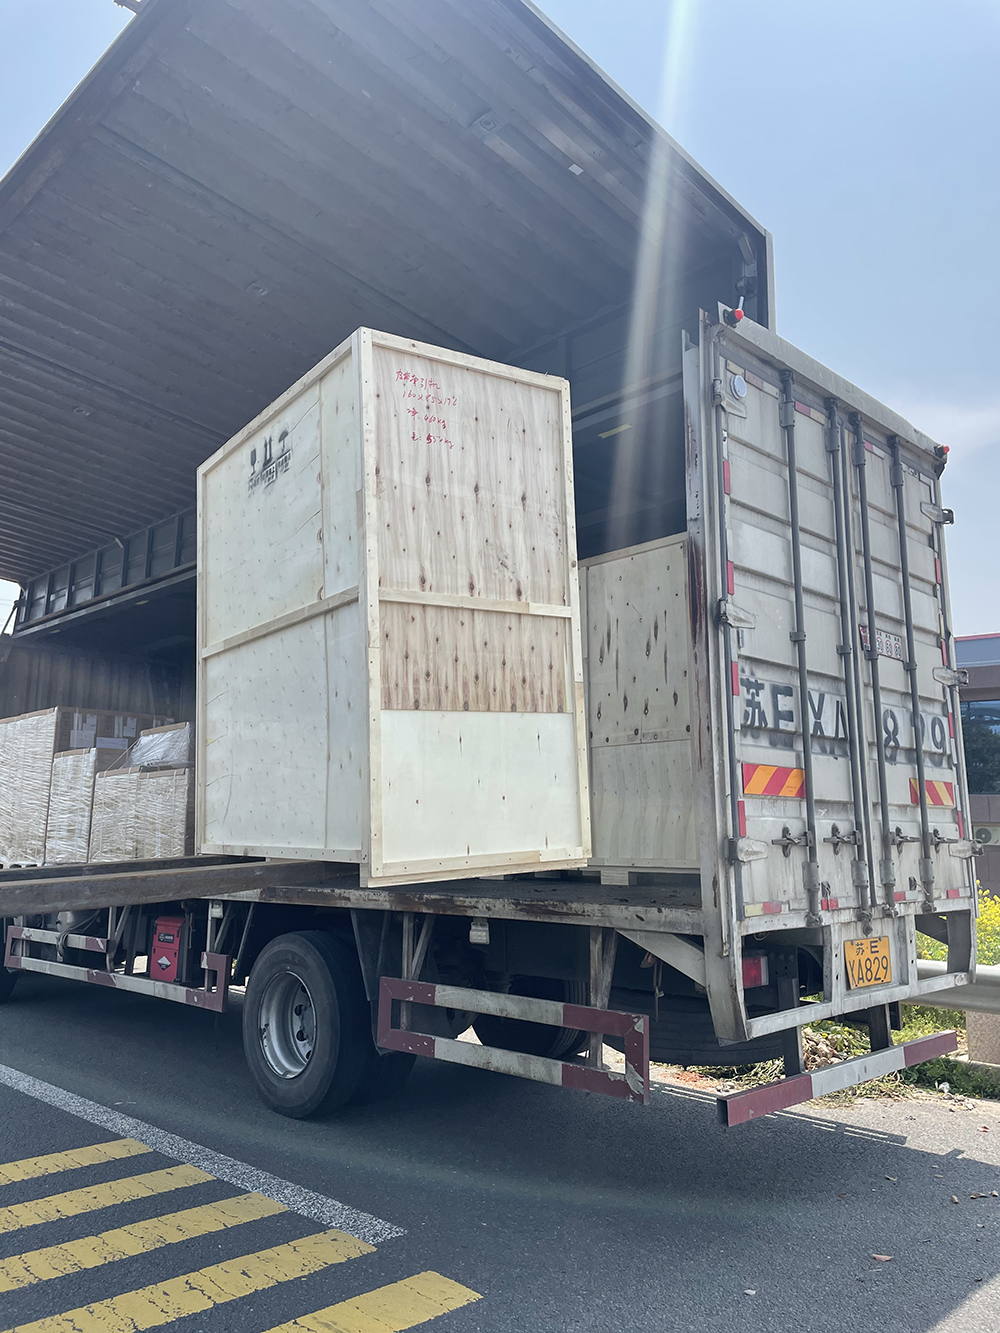 South Africa customers’ goods were load successfully